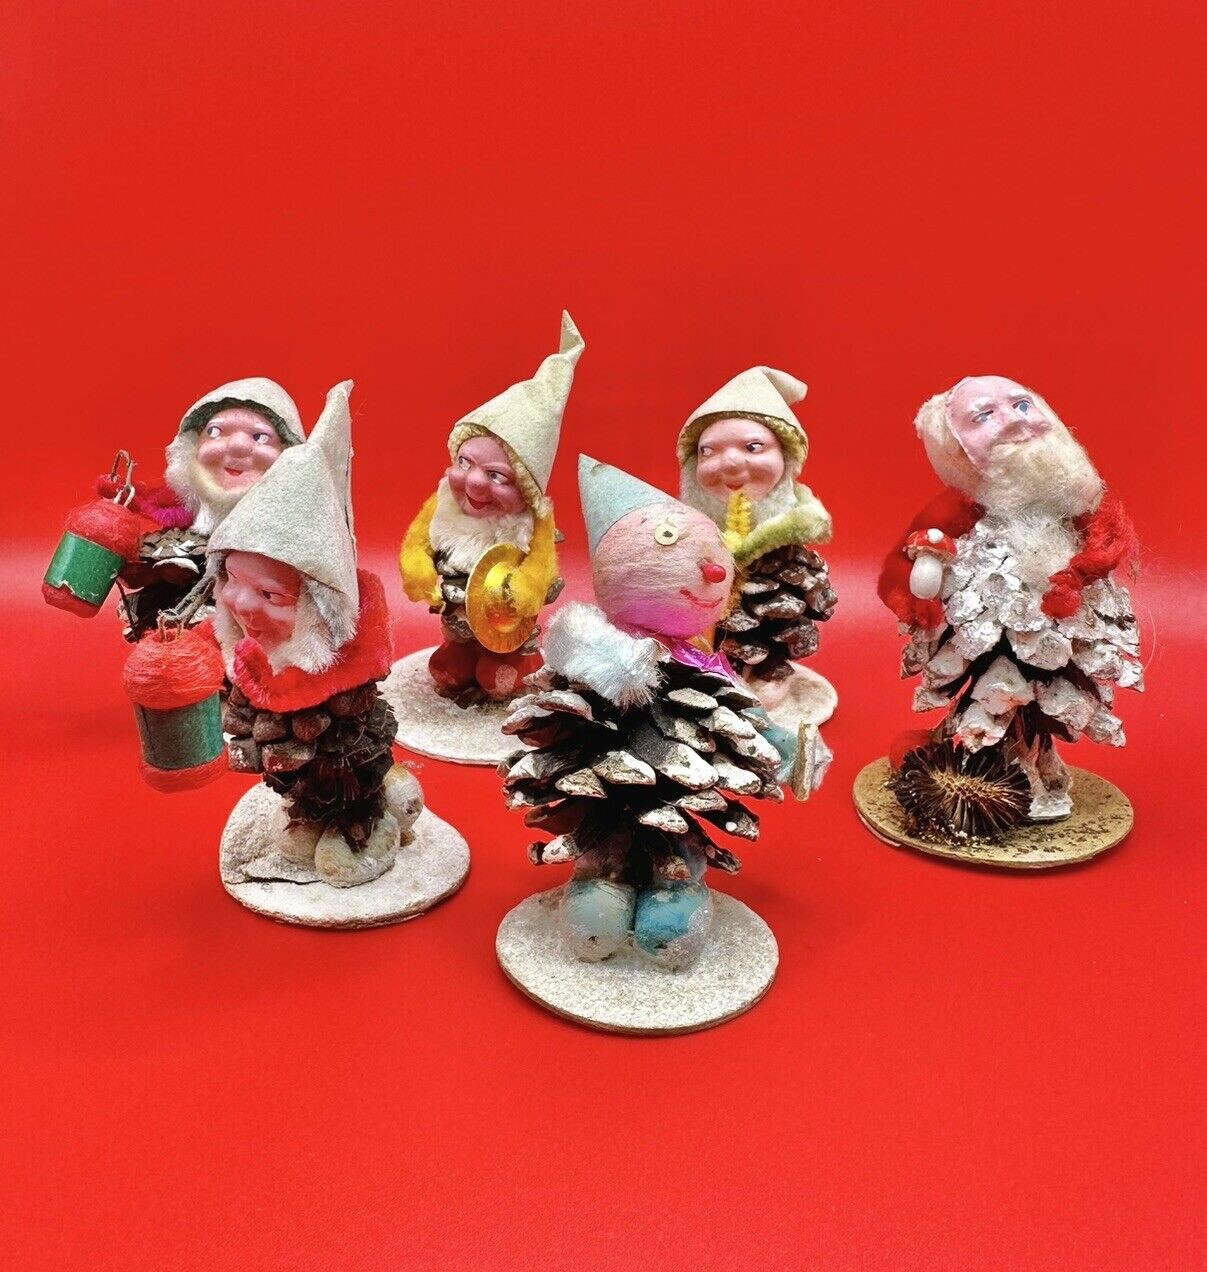 Lot Of Vintage Christmas Pinecone Elf / Gnome (Japan & West Germany) Figurines